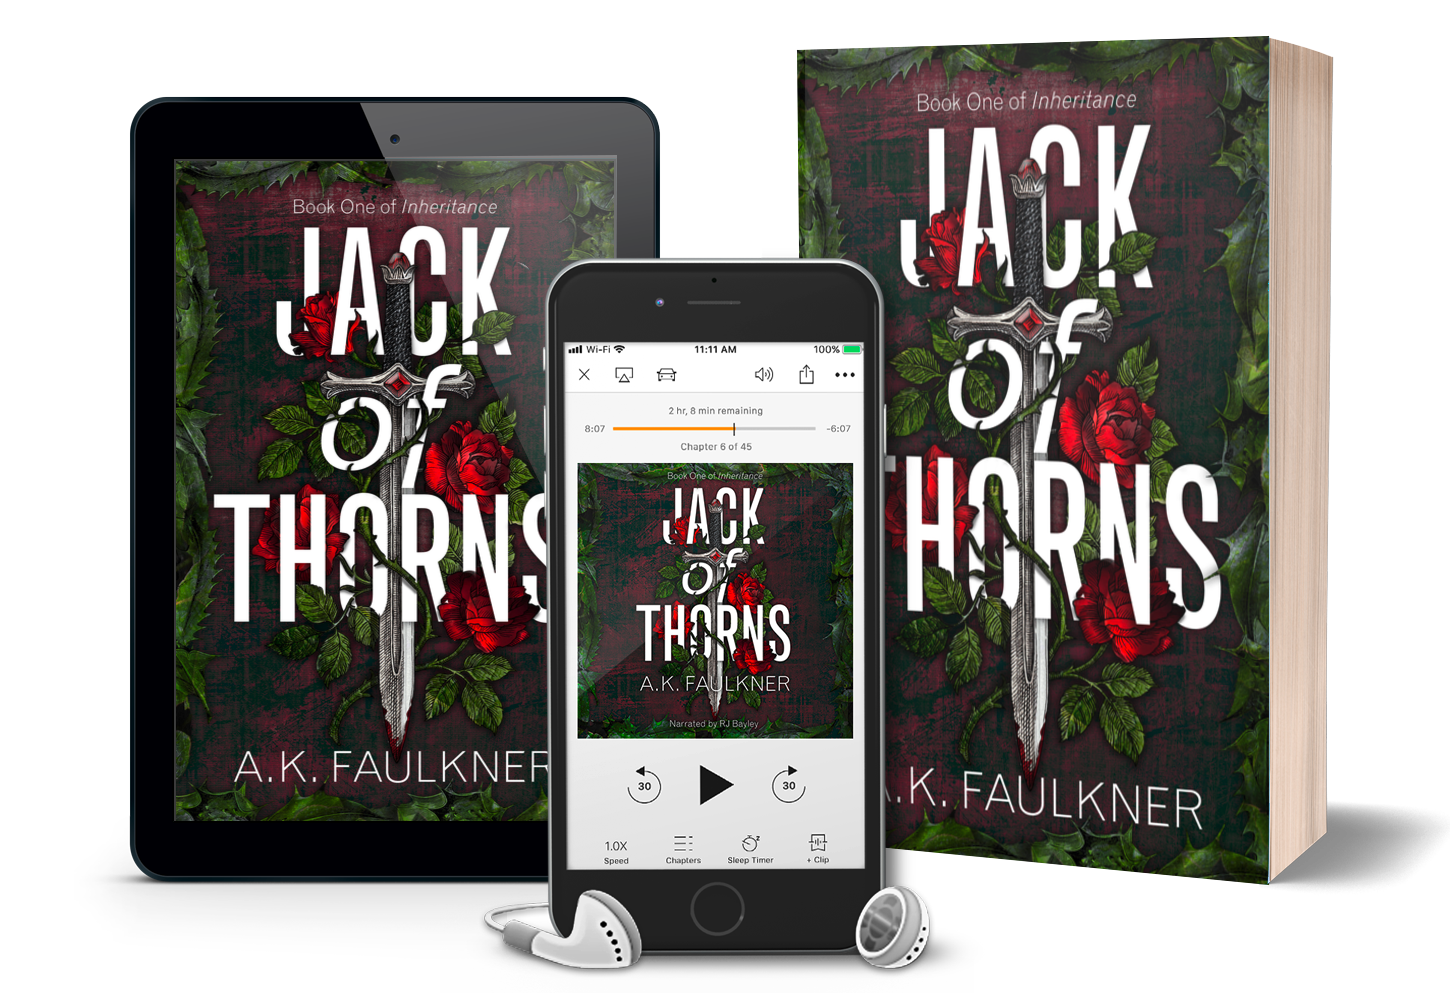 Jack of Thorns as an ebook, audiobook, and paperback